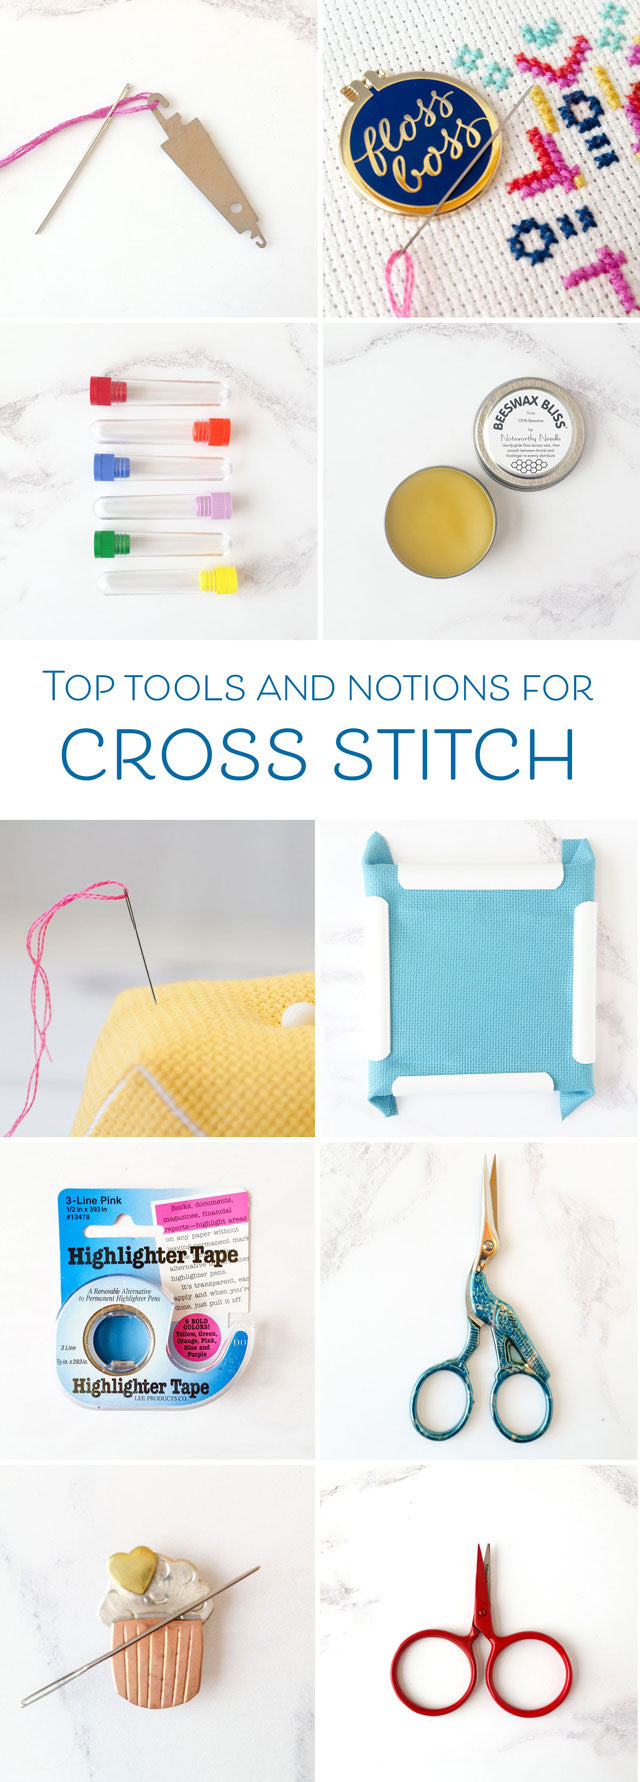 Top tools and notions for cross stitch and embroidery